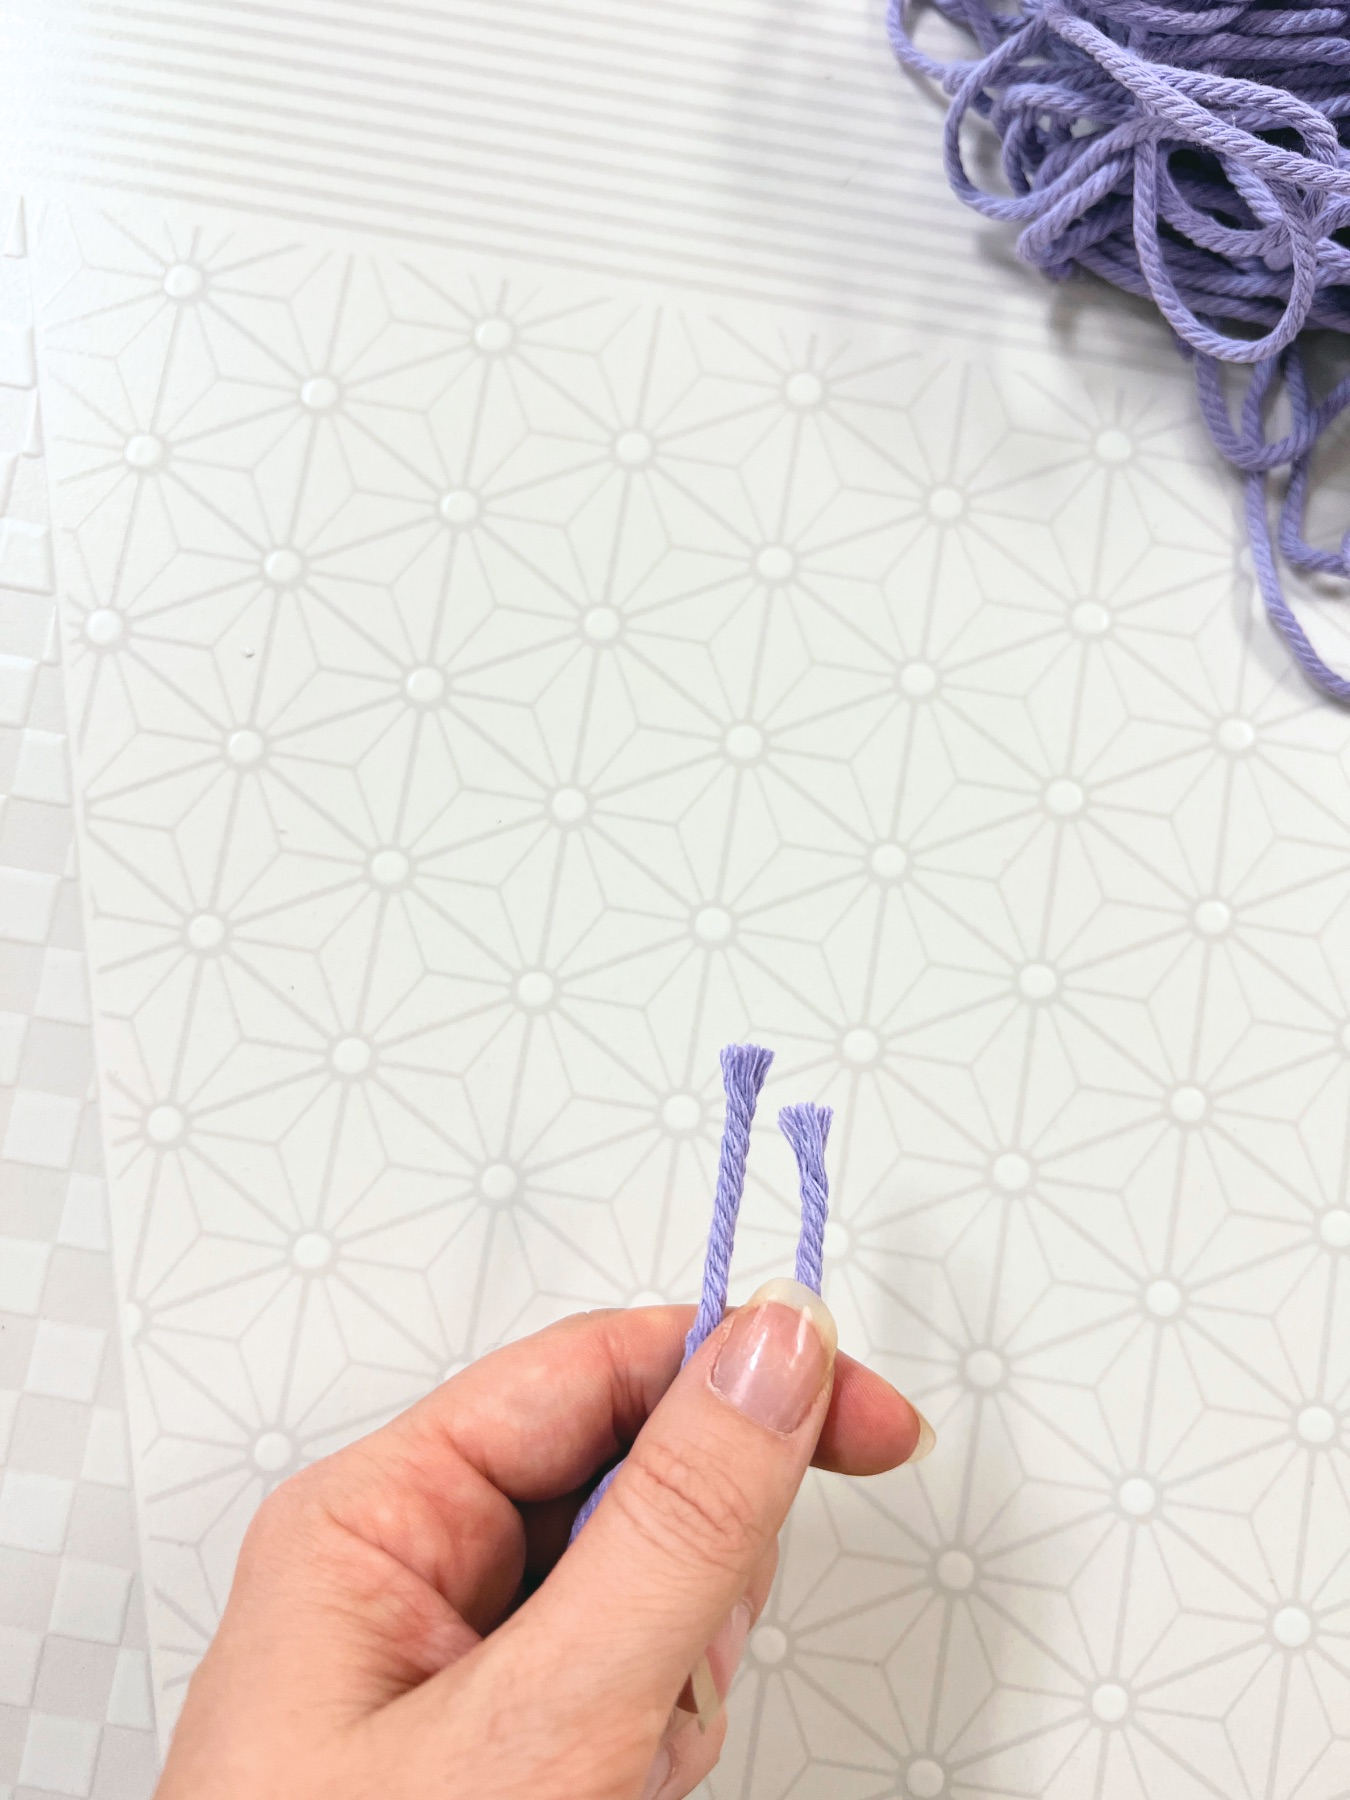 match up the ends of your macrame cord